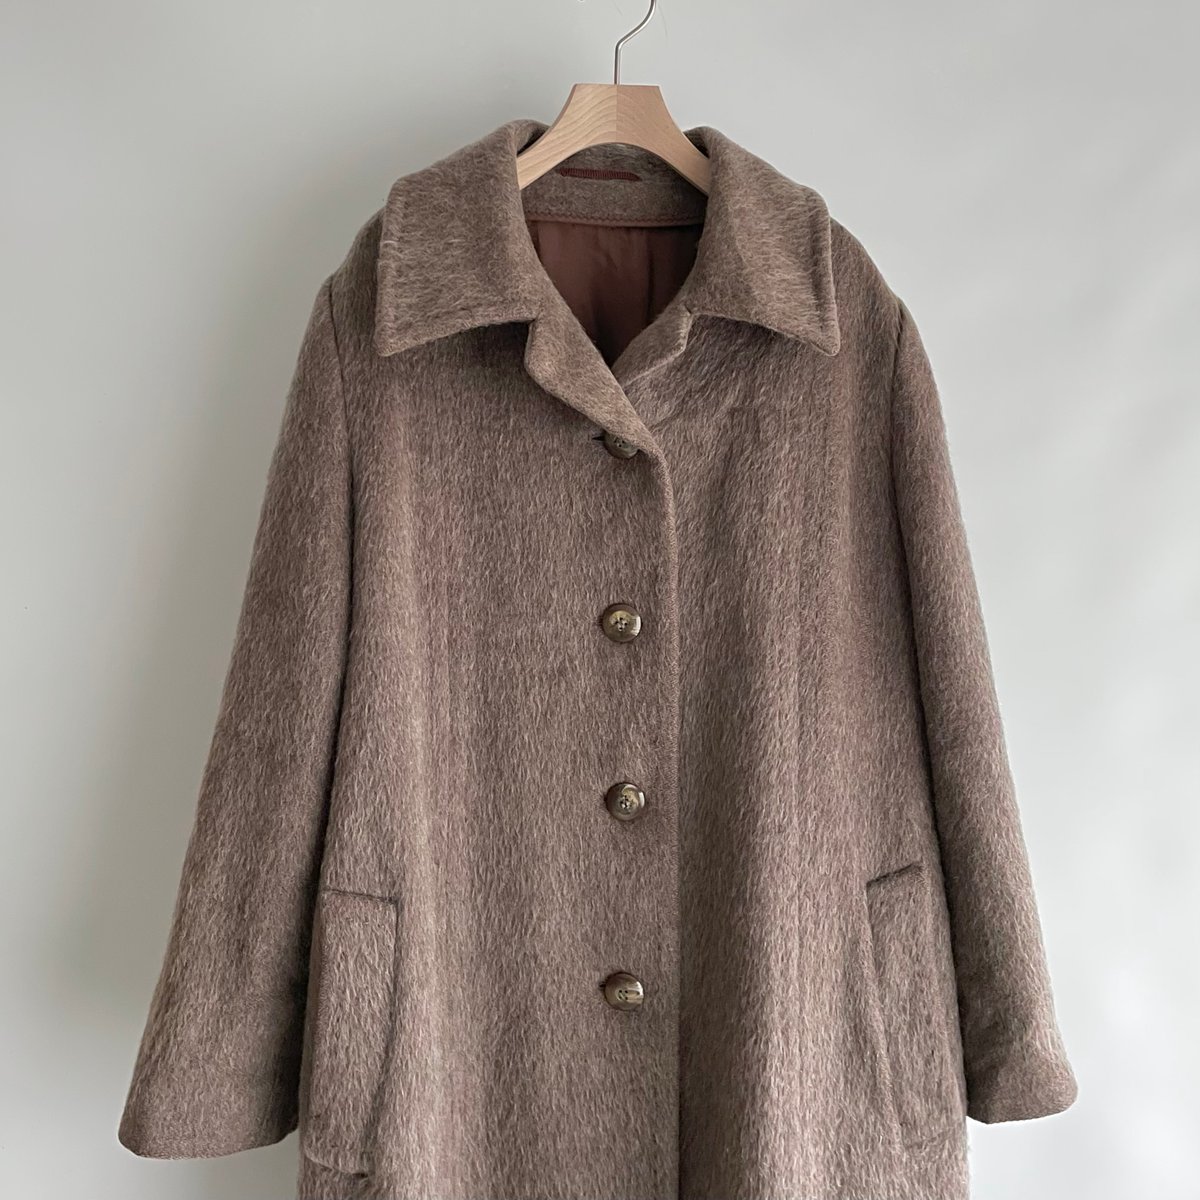 Shaggy brown coat | and C